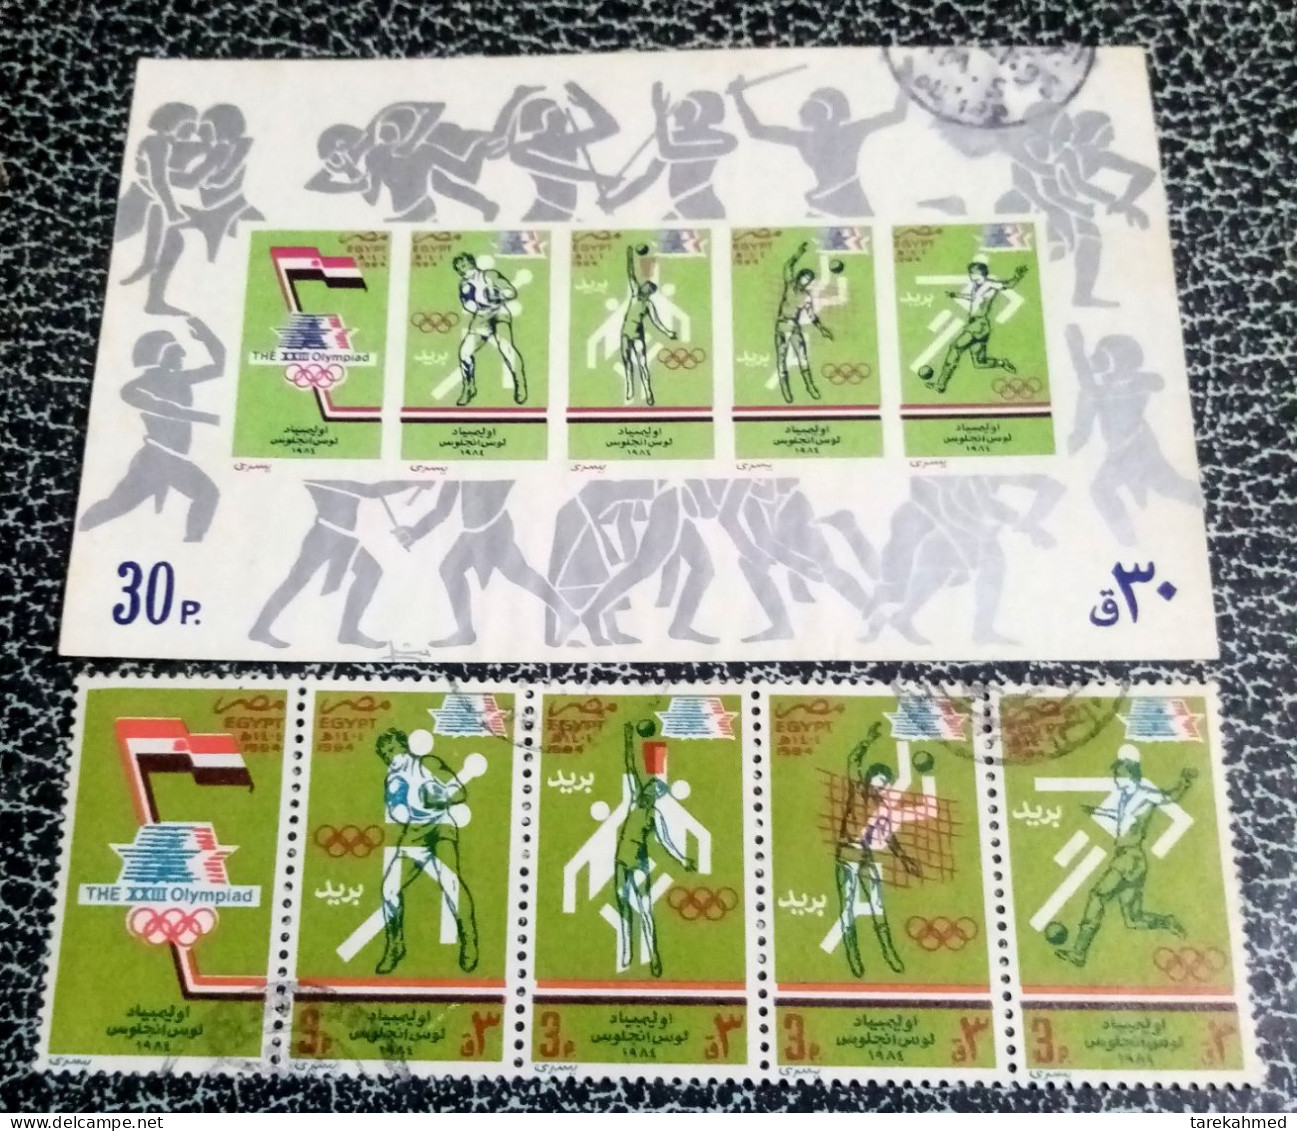 EGYPT -Complete Set Of The Olympic Games 1984-Los Angeles Olympics With The Souvenir Sheet, VF - Usados